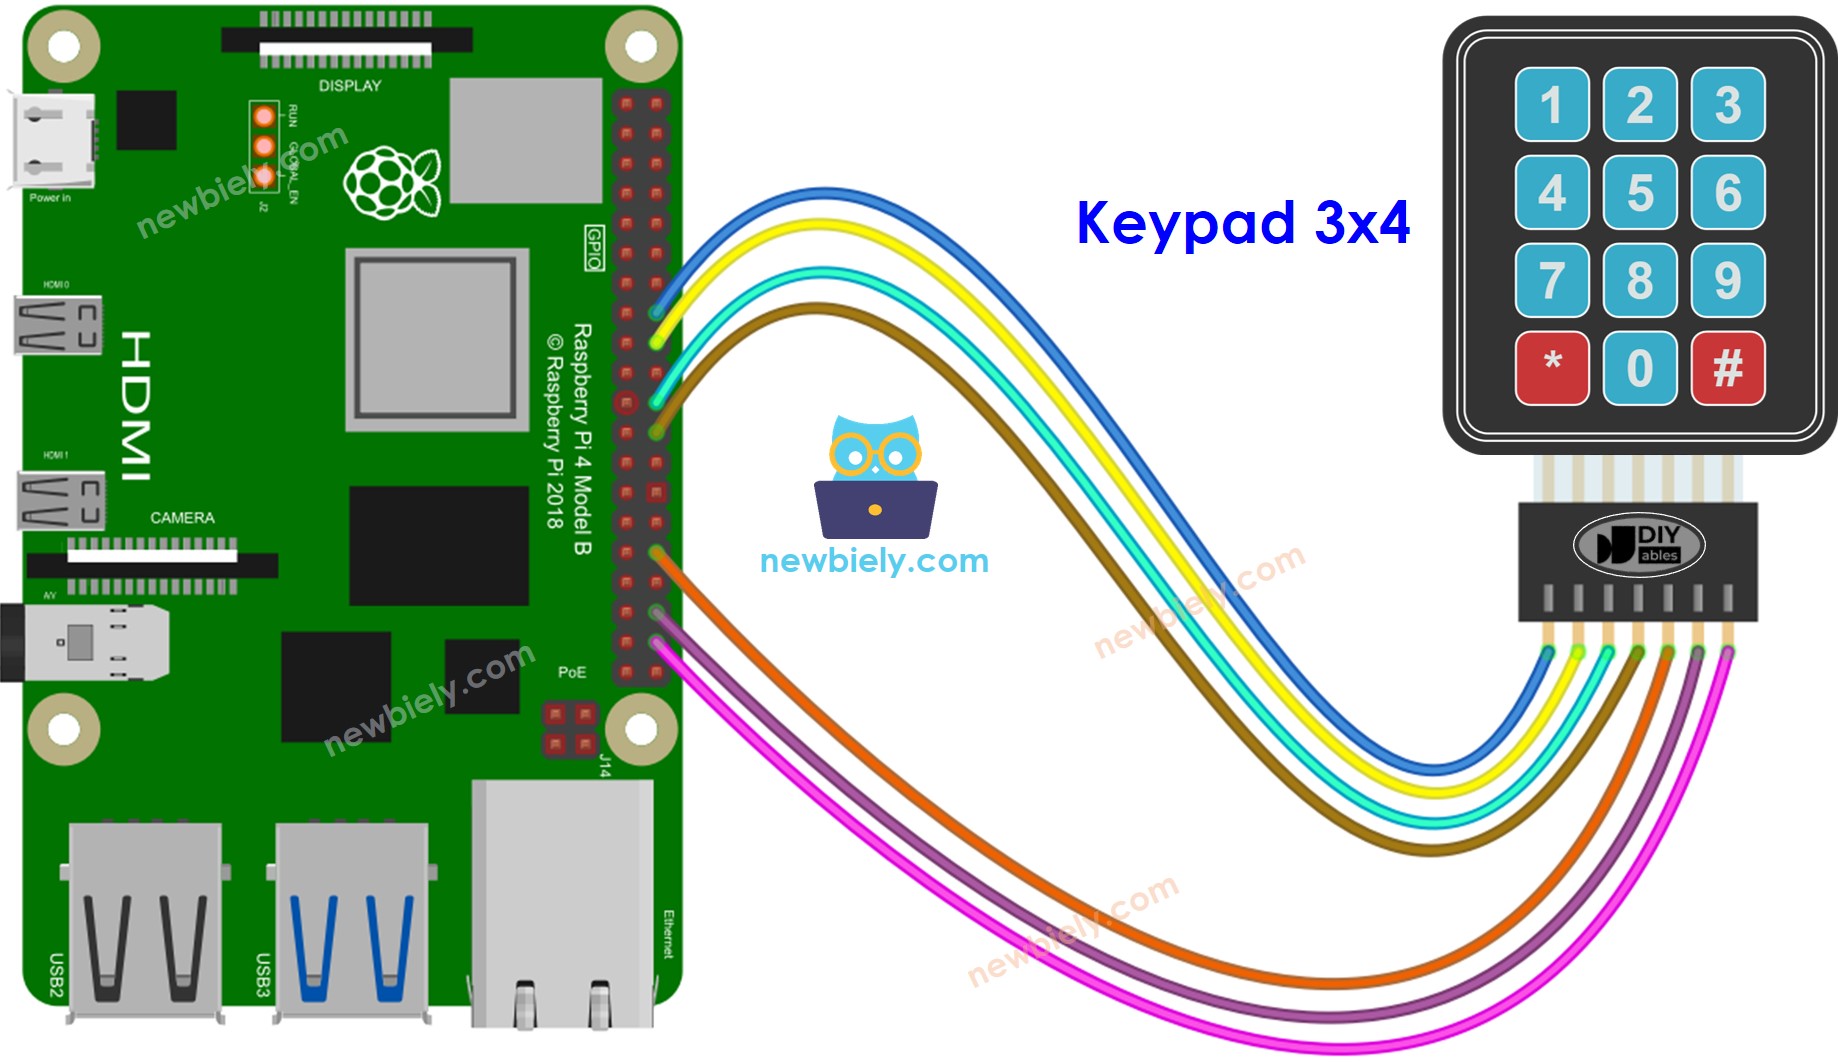 The wiring diagram between Raspberry Pi and Keypad 3x4